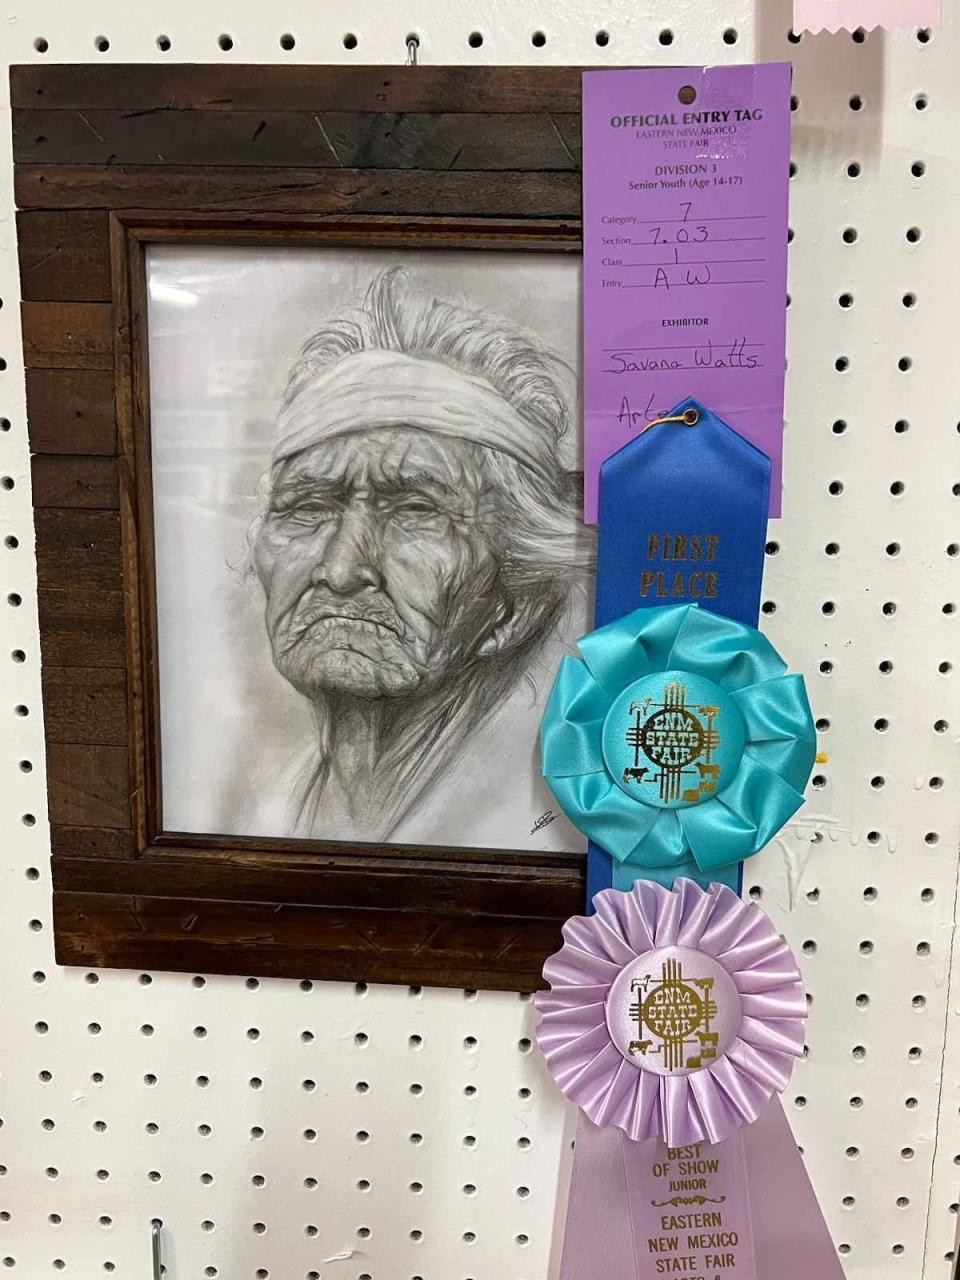 A drawing by Artesia High School swimmer Savana Watts won awards at the Eastern New Mexico State Fair in Roswell.